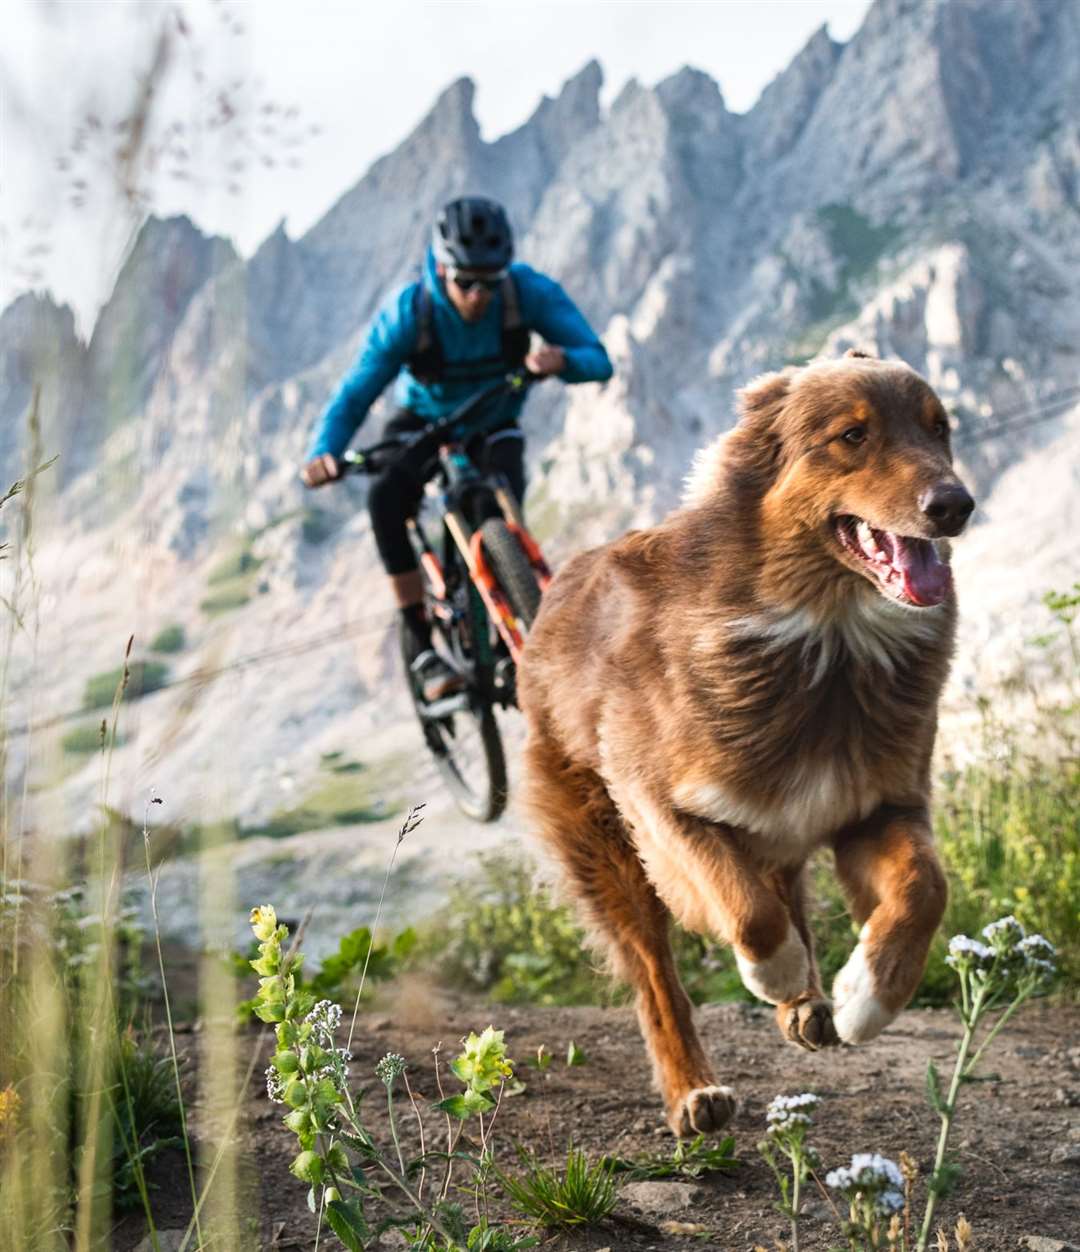 Paws and Wheels features Oli Dorn and Balu